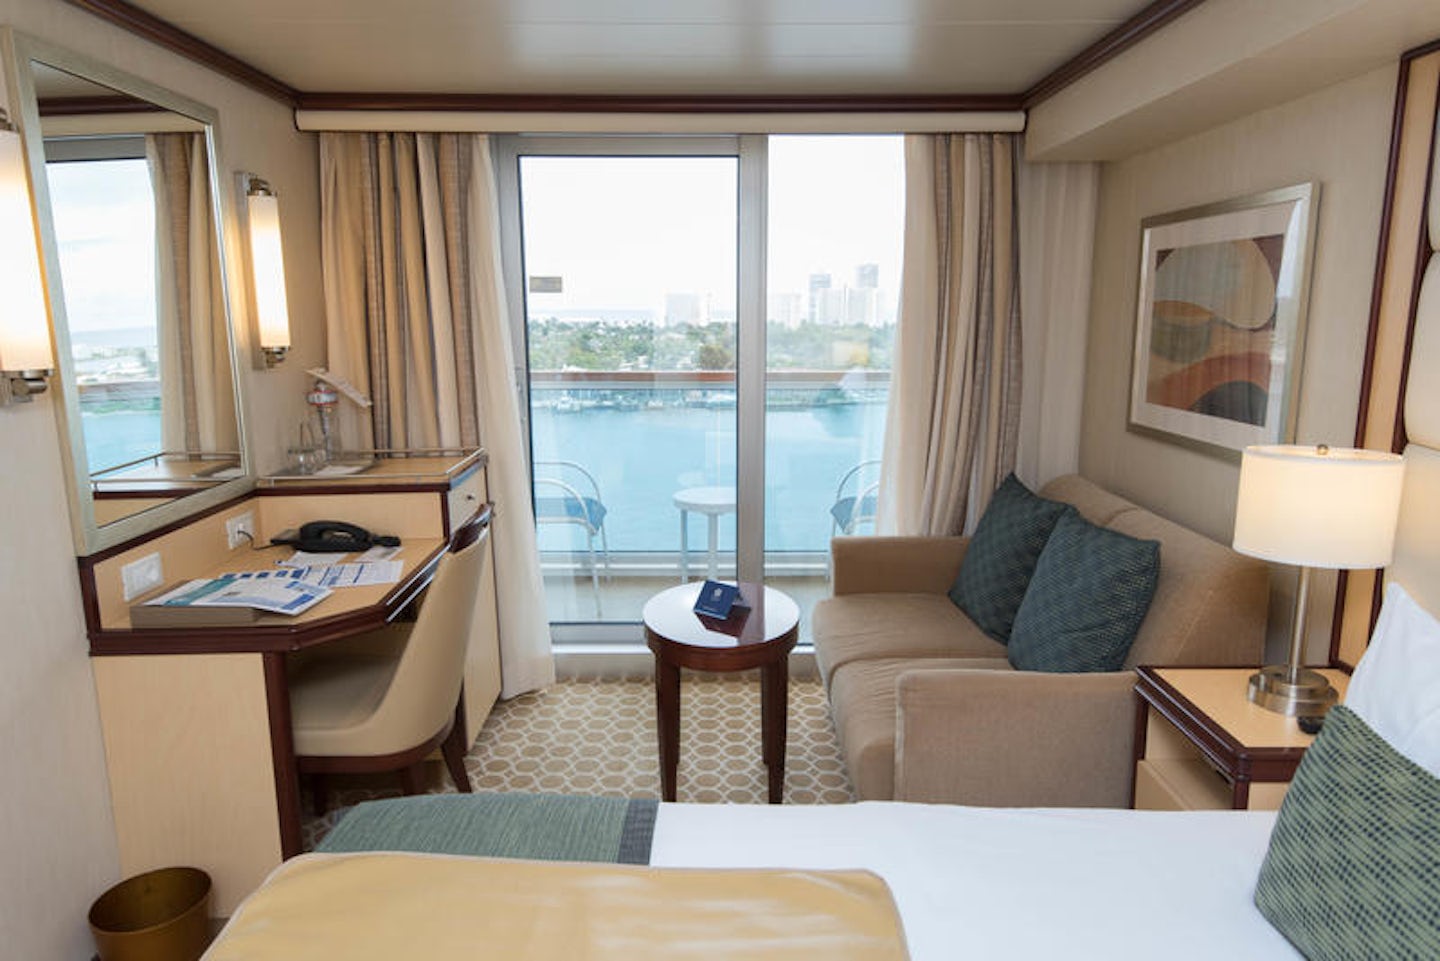 The Deluxe Balcony Cabin (DB) on Royal Princess